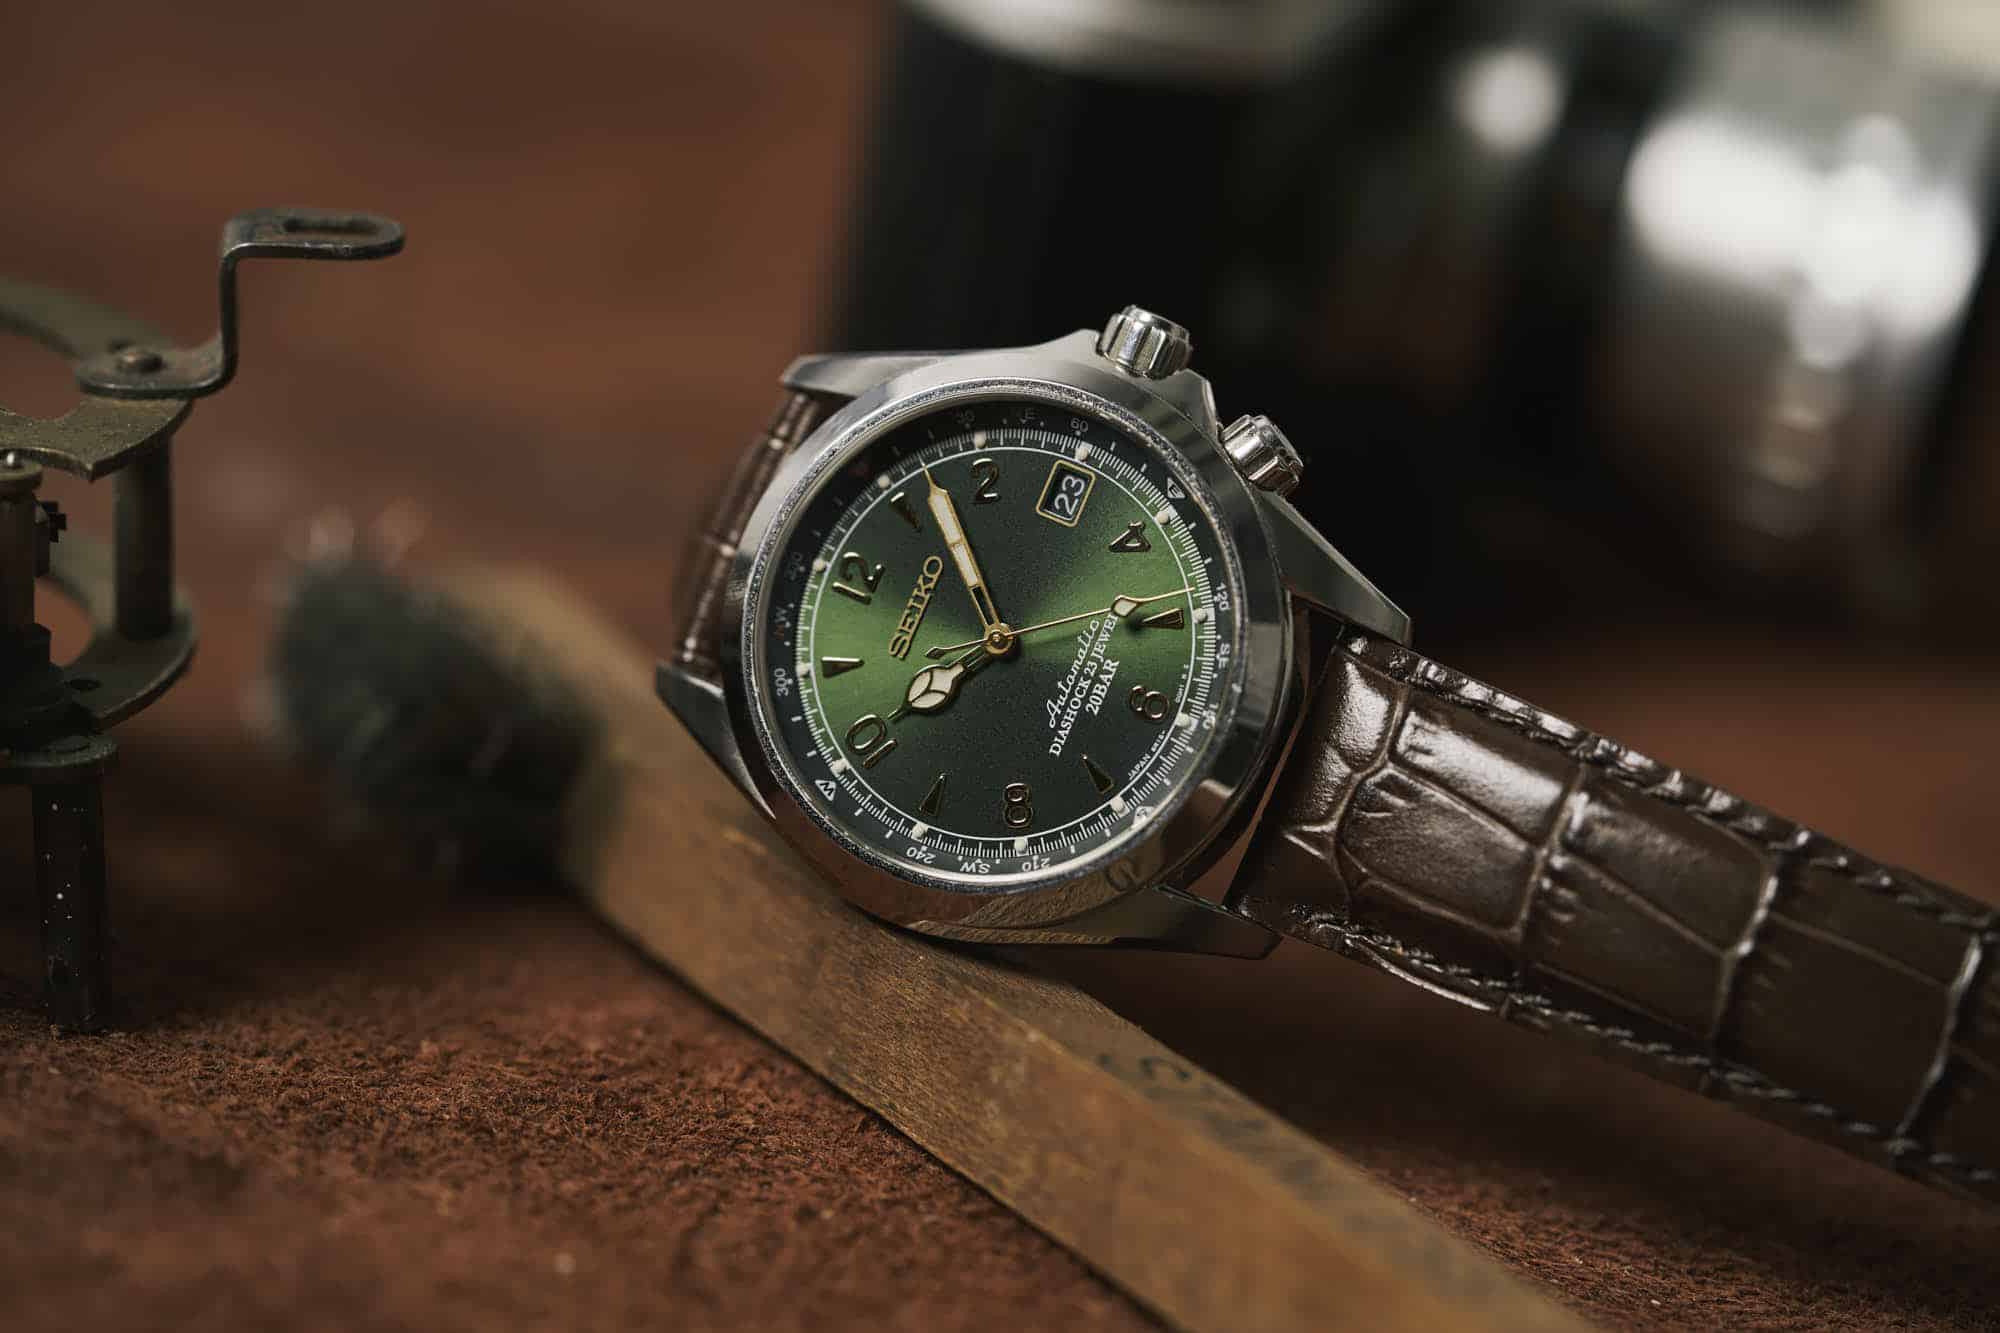 Seiko Alpinist SARB017] First watch! How does it look? : r/Watches